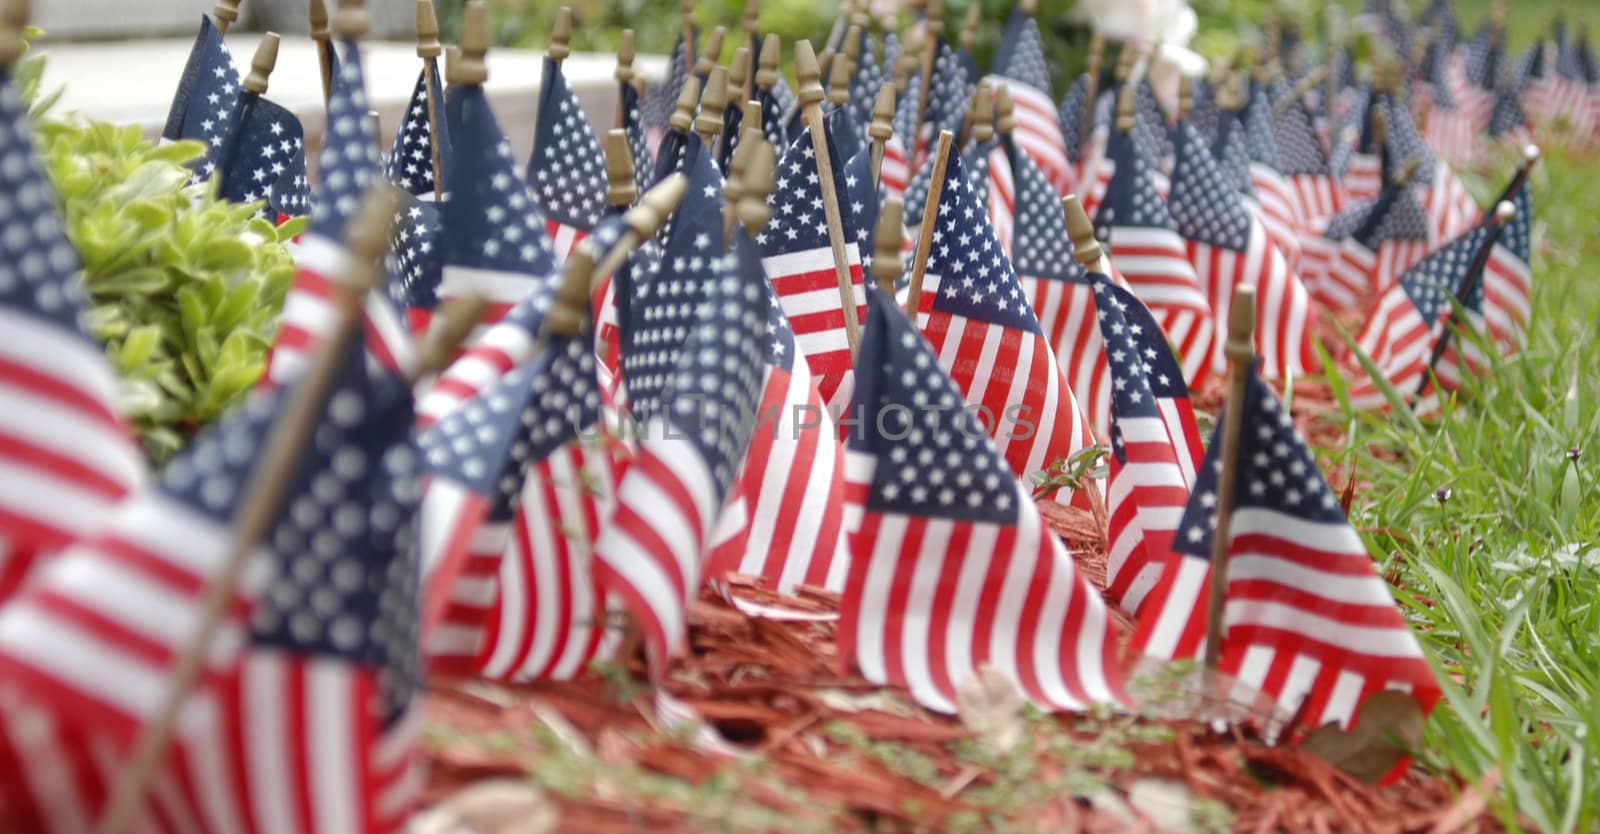                                 American flags in the ground during the fourth of July